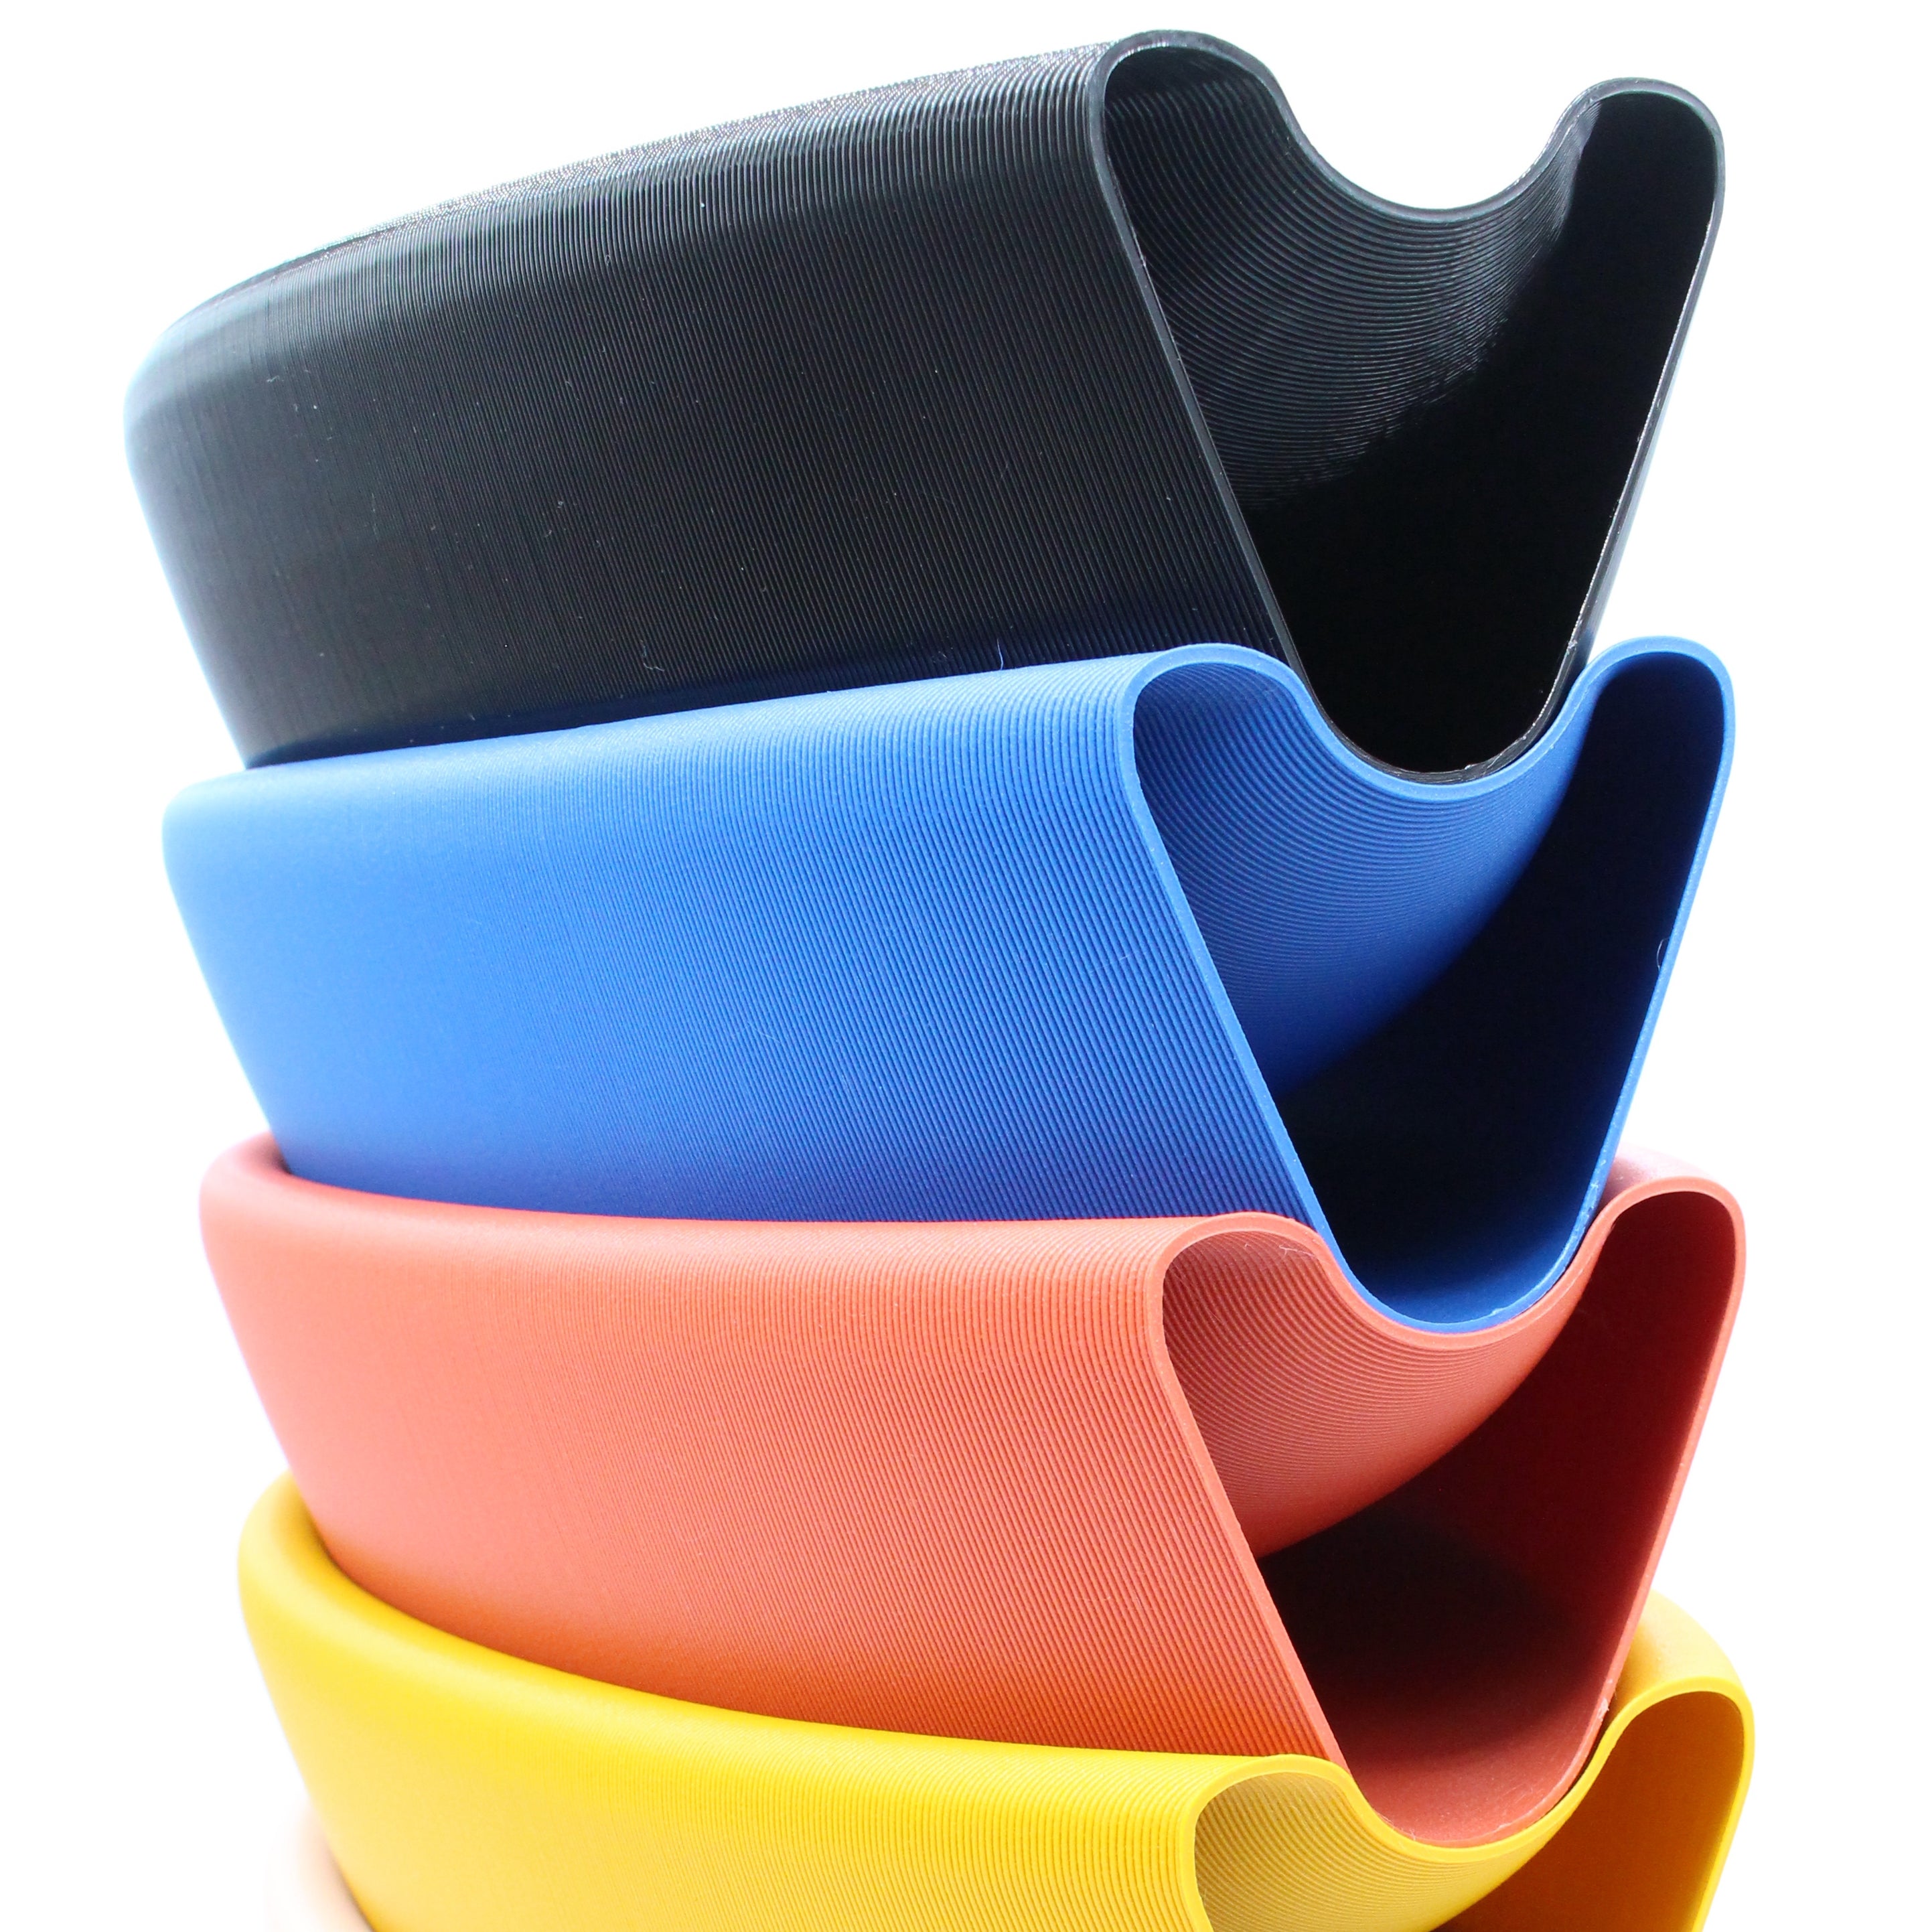 Stack of Aera bowls in various colors made with recycled plastic by Deme Design